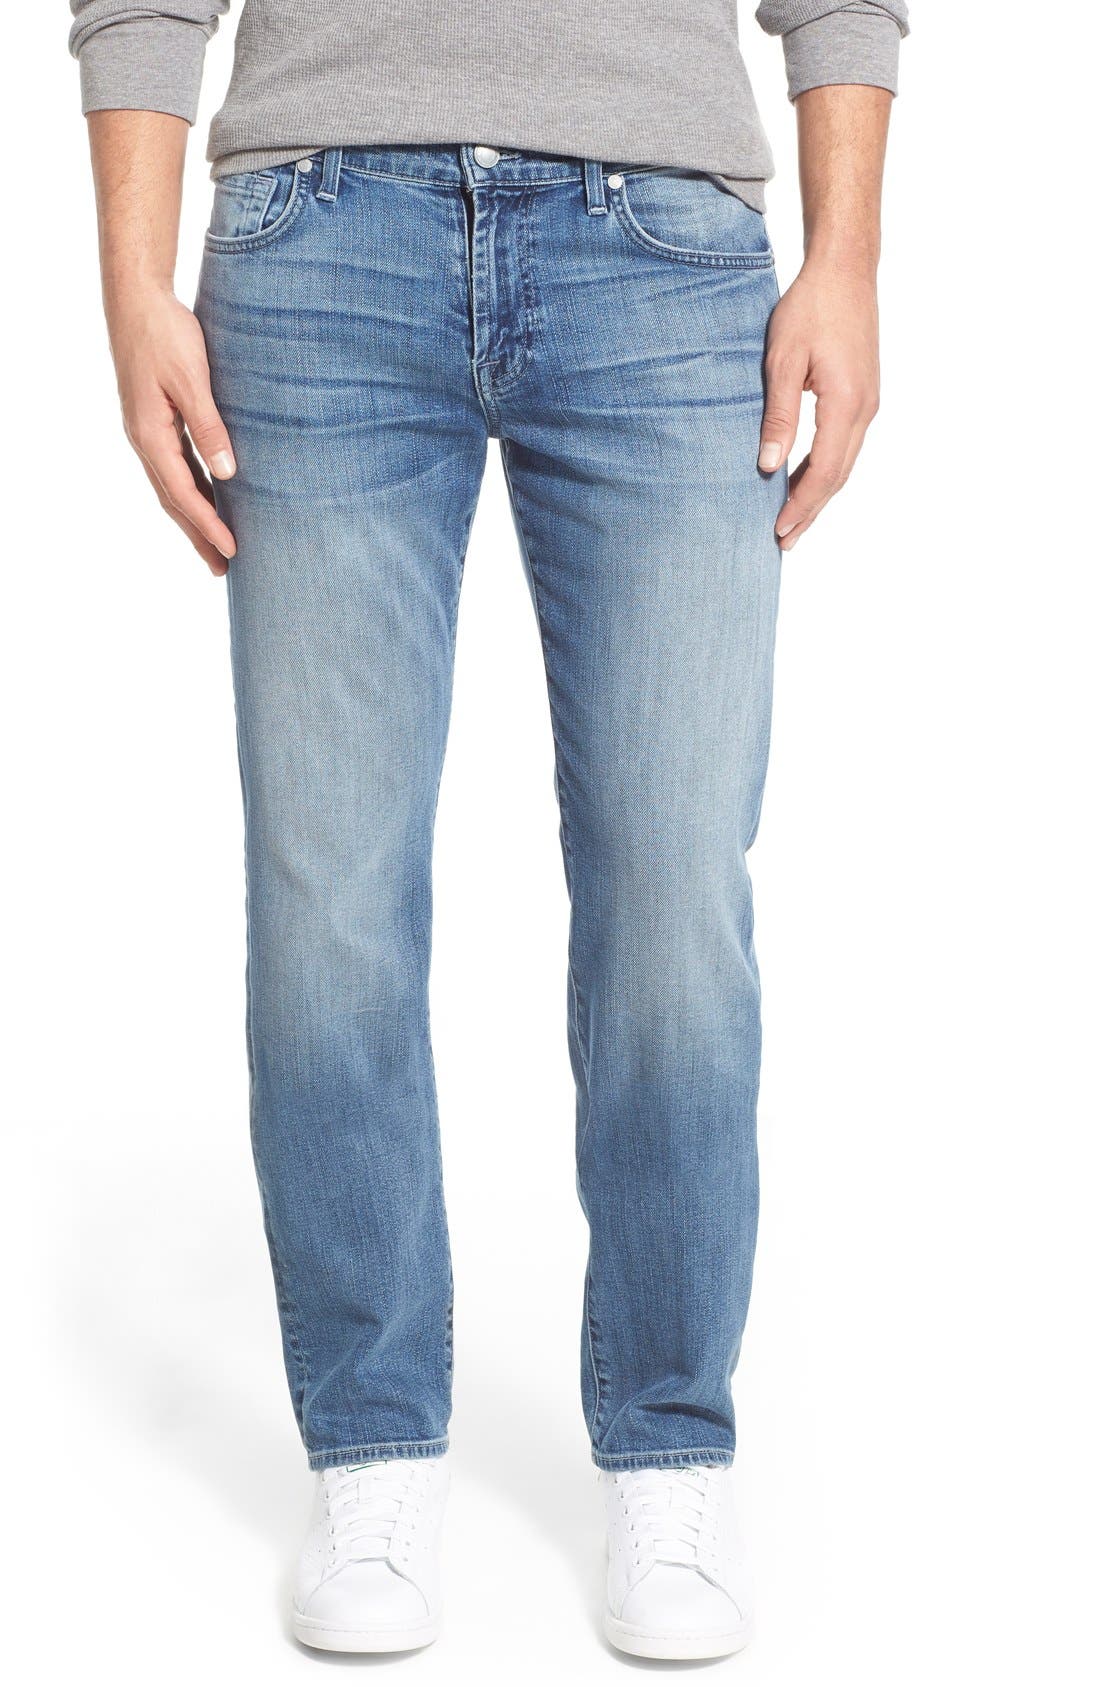 7 for all mankind foolproof denim